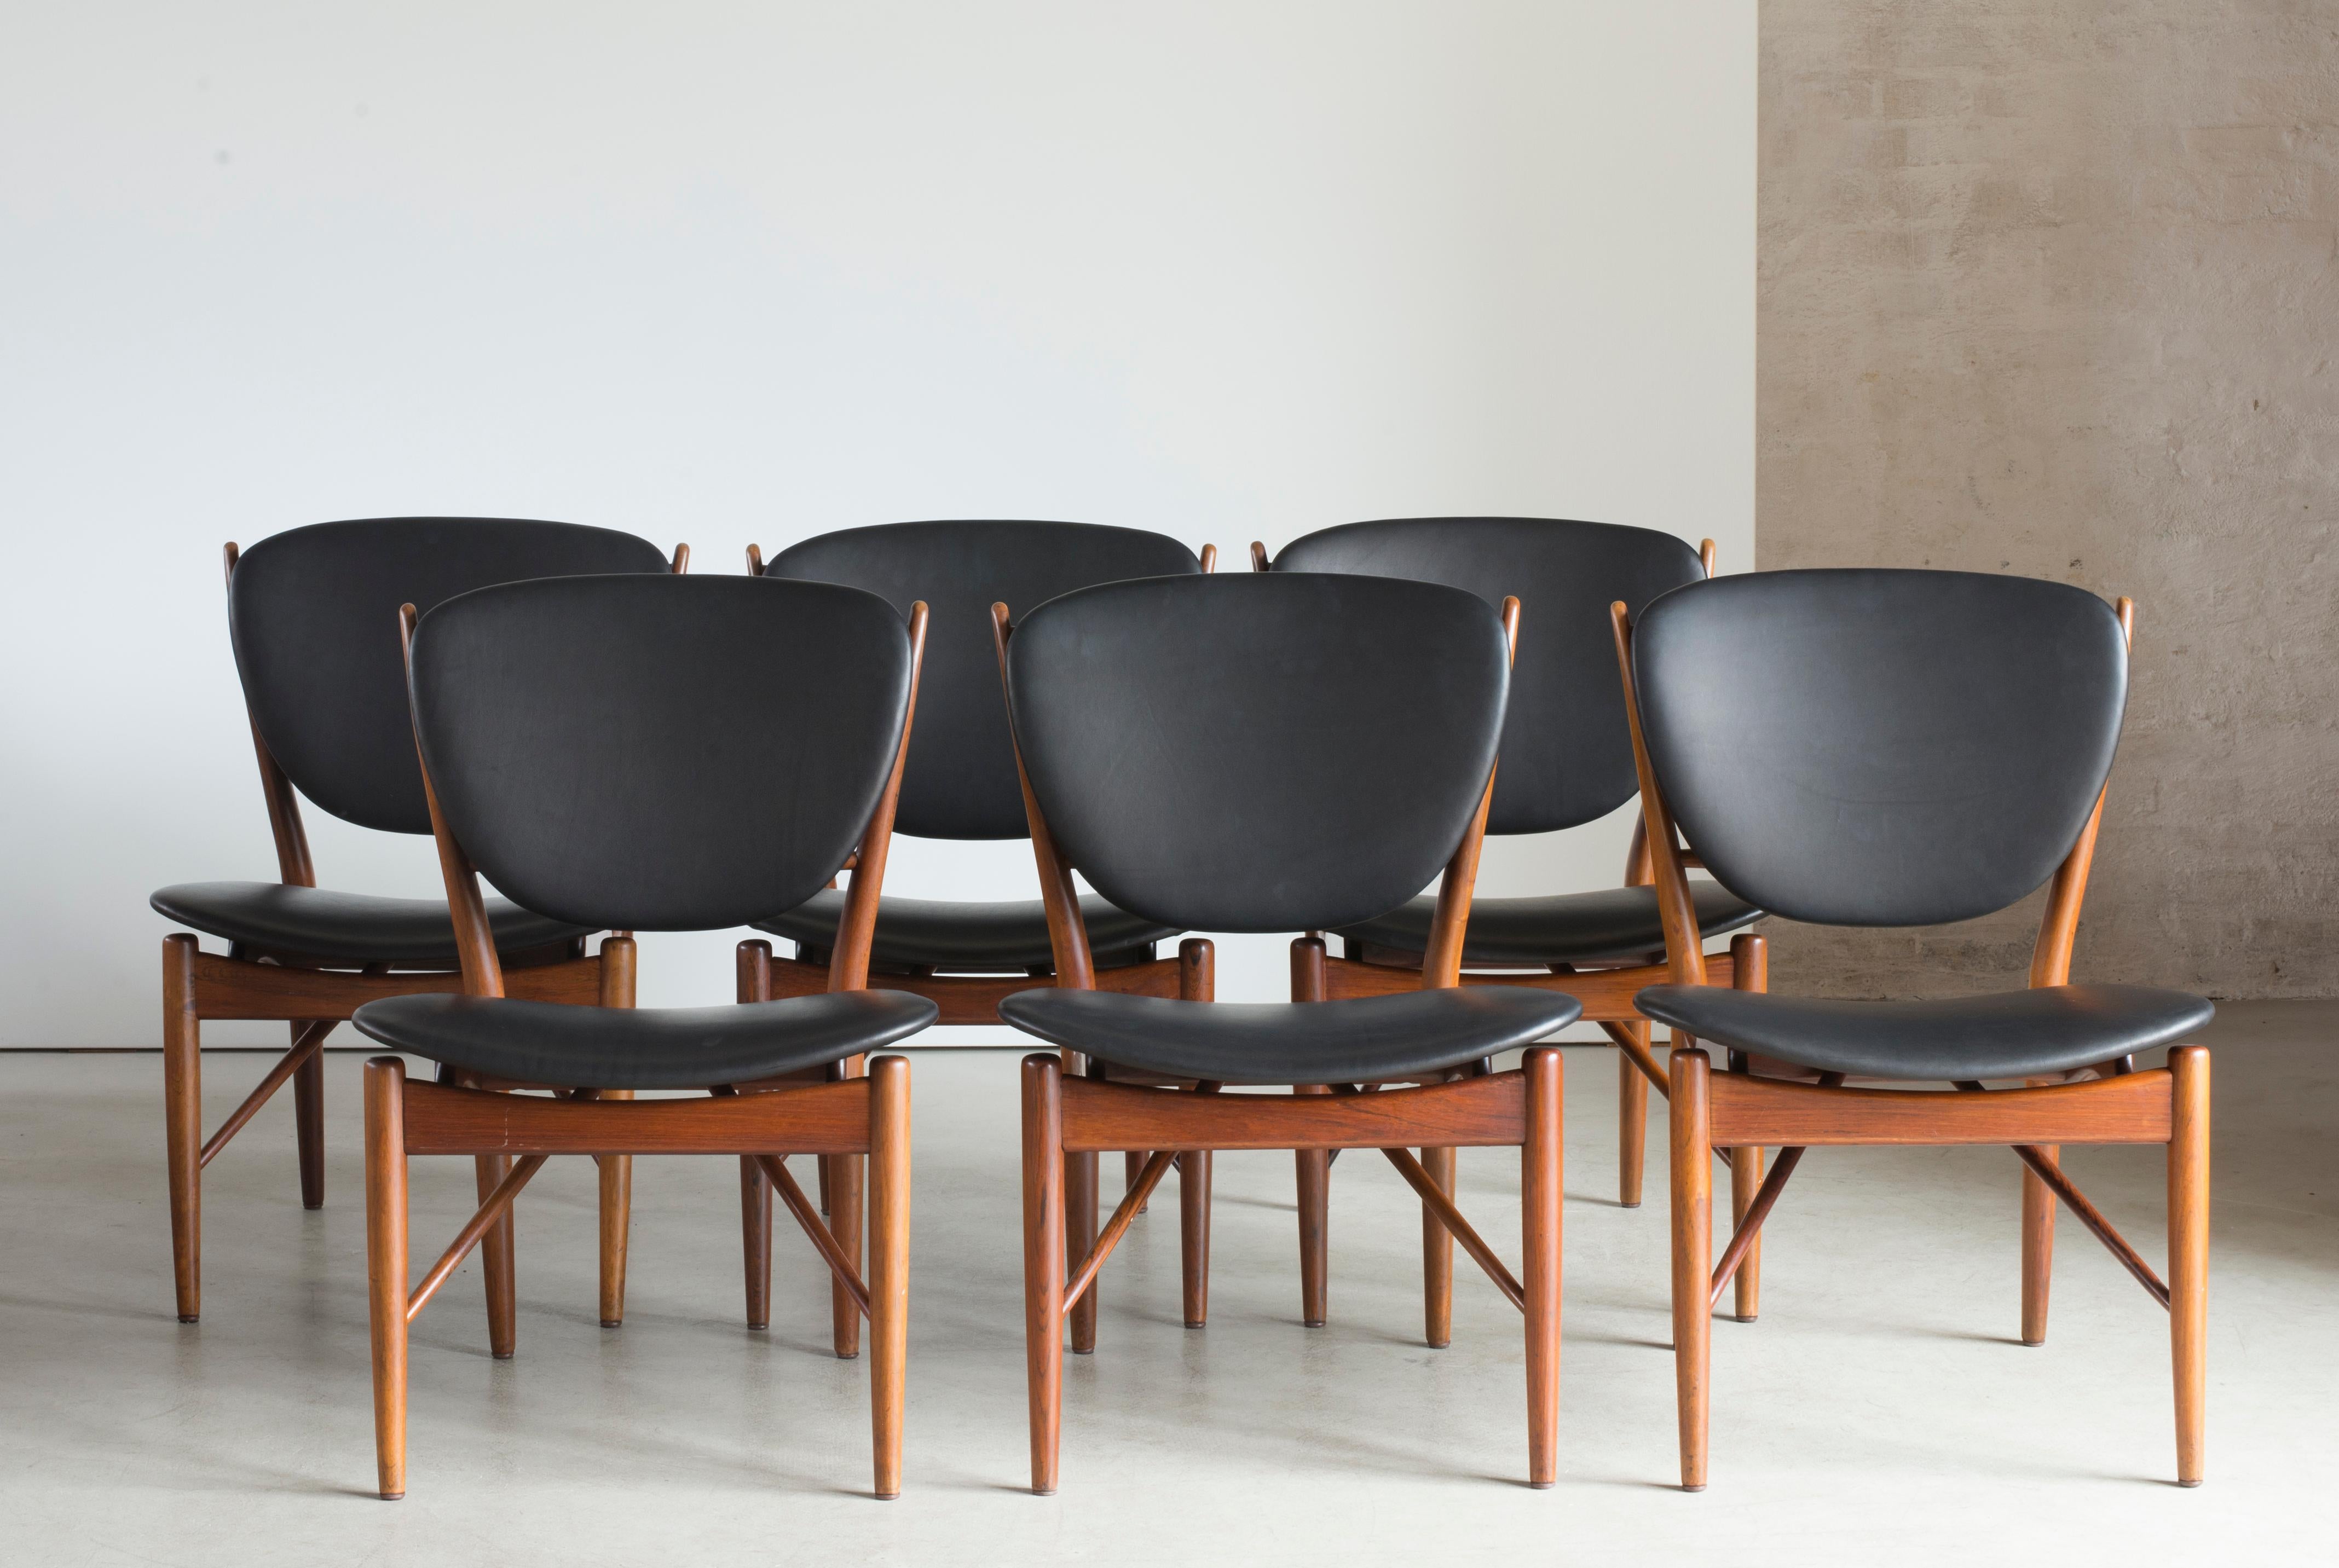 Finn Juhl set of six chairs of rosewood. Seat and back upholstered with black leather. 

Executed by cabinetmaker Niels Vodder, Copenhagen, Denmark. Underside of each chair branded CABINETMAKER Niels Vodder/COPENHAGEN DENMARK/DESIGN: Finn Juhl.